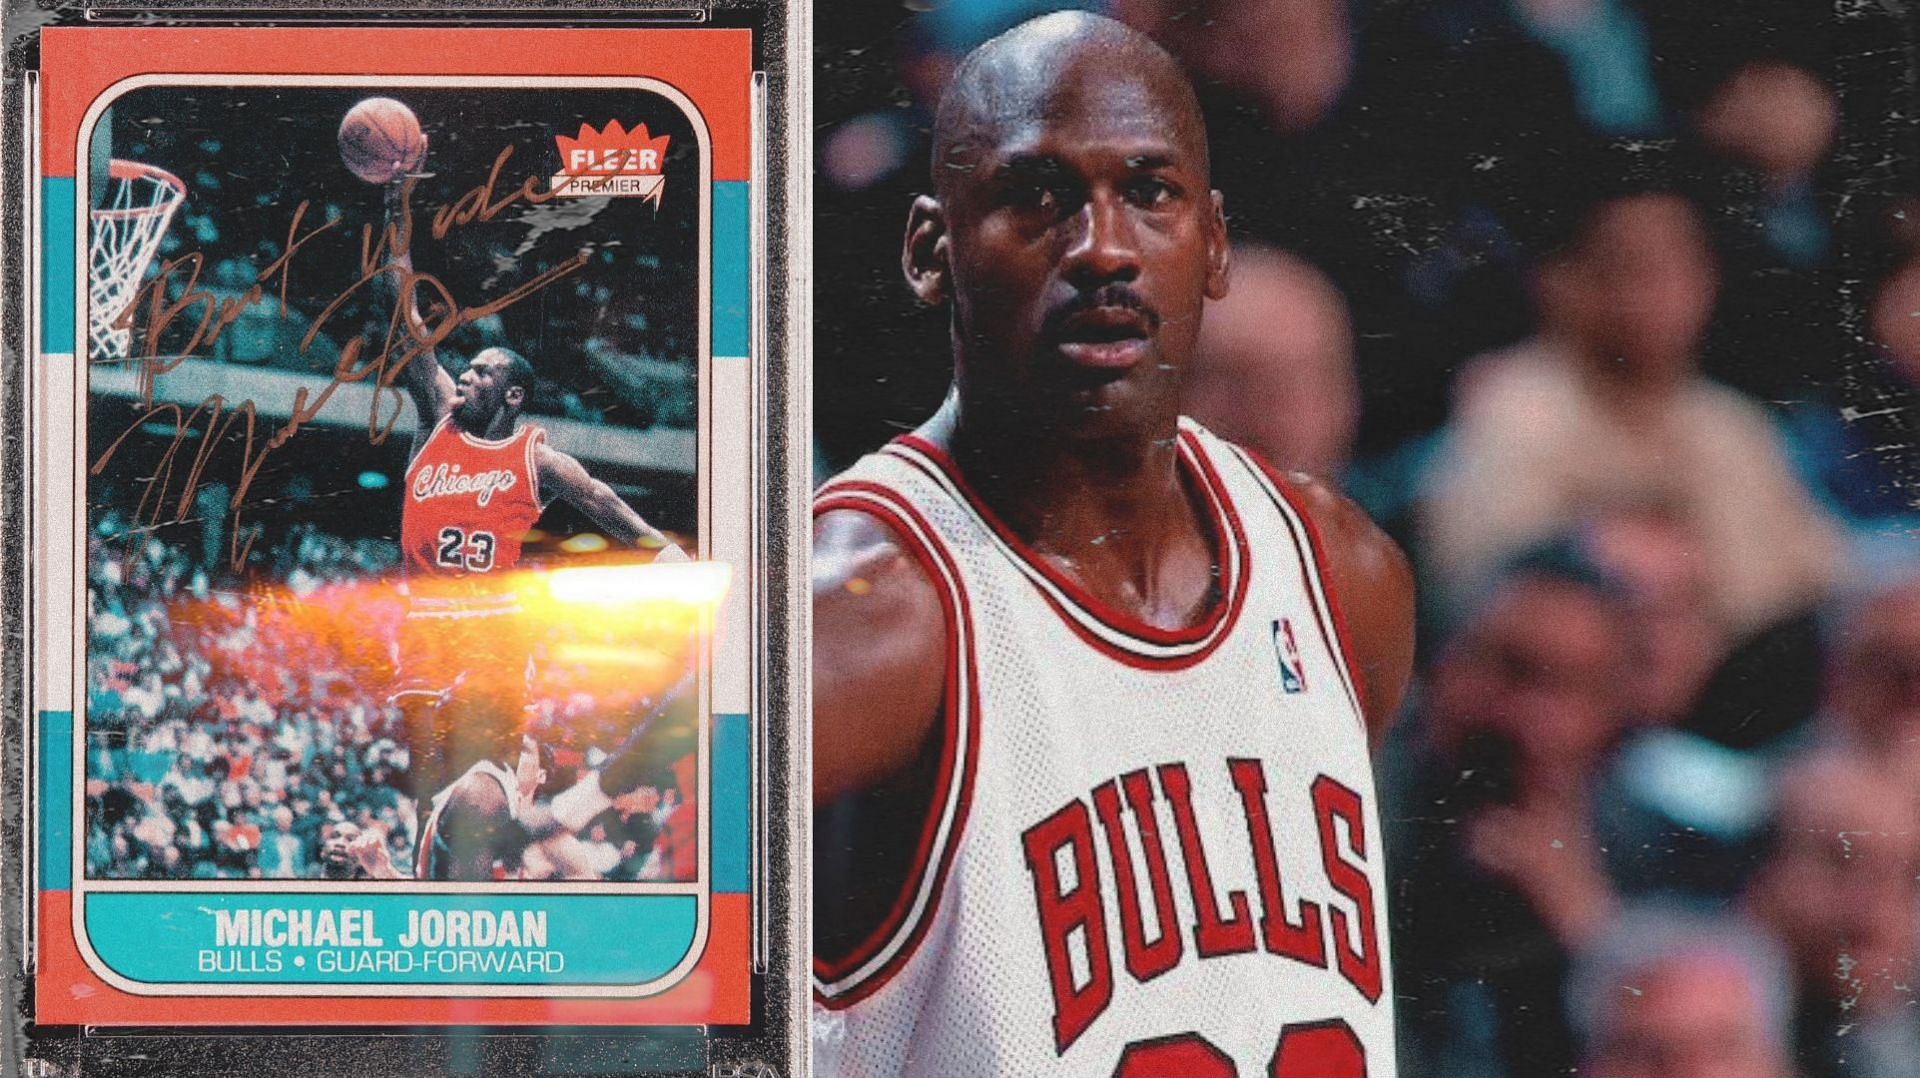 Michael Jordan signed basketball card might sell below estimated price due to bad signature